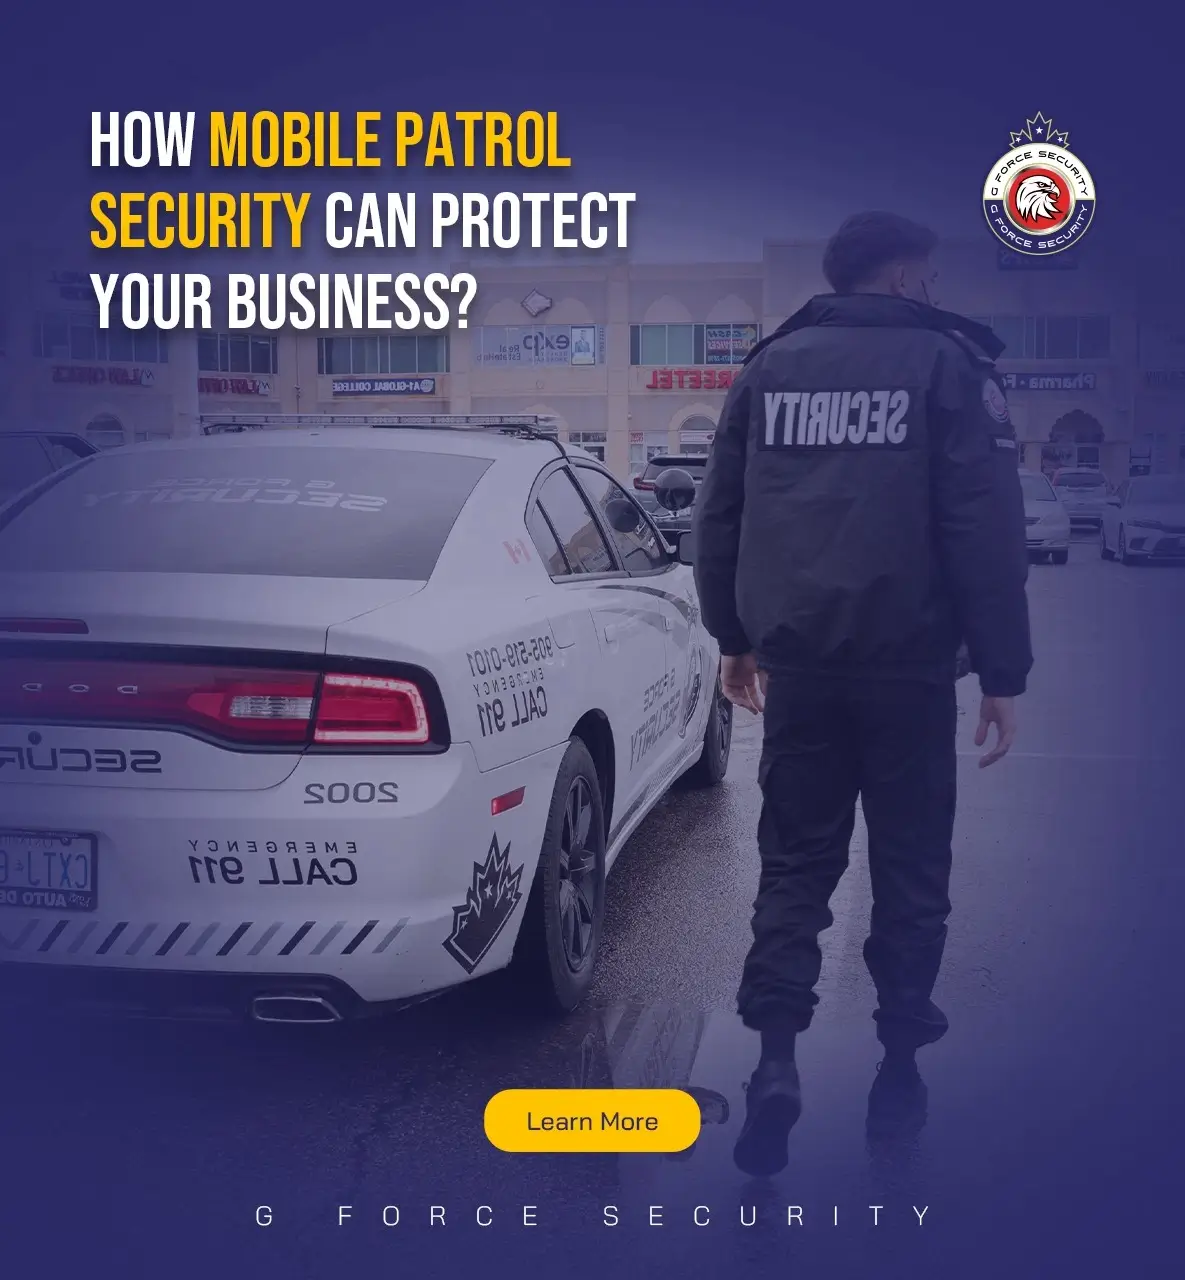 How Mobile Patrol Security Can Protect Your Business?